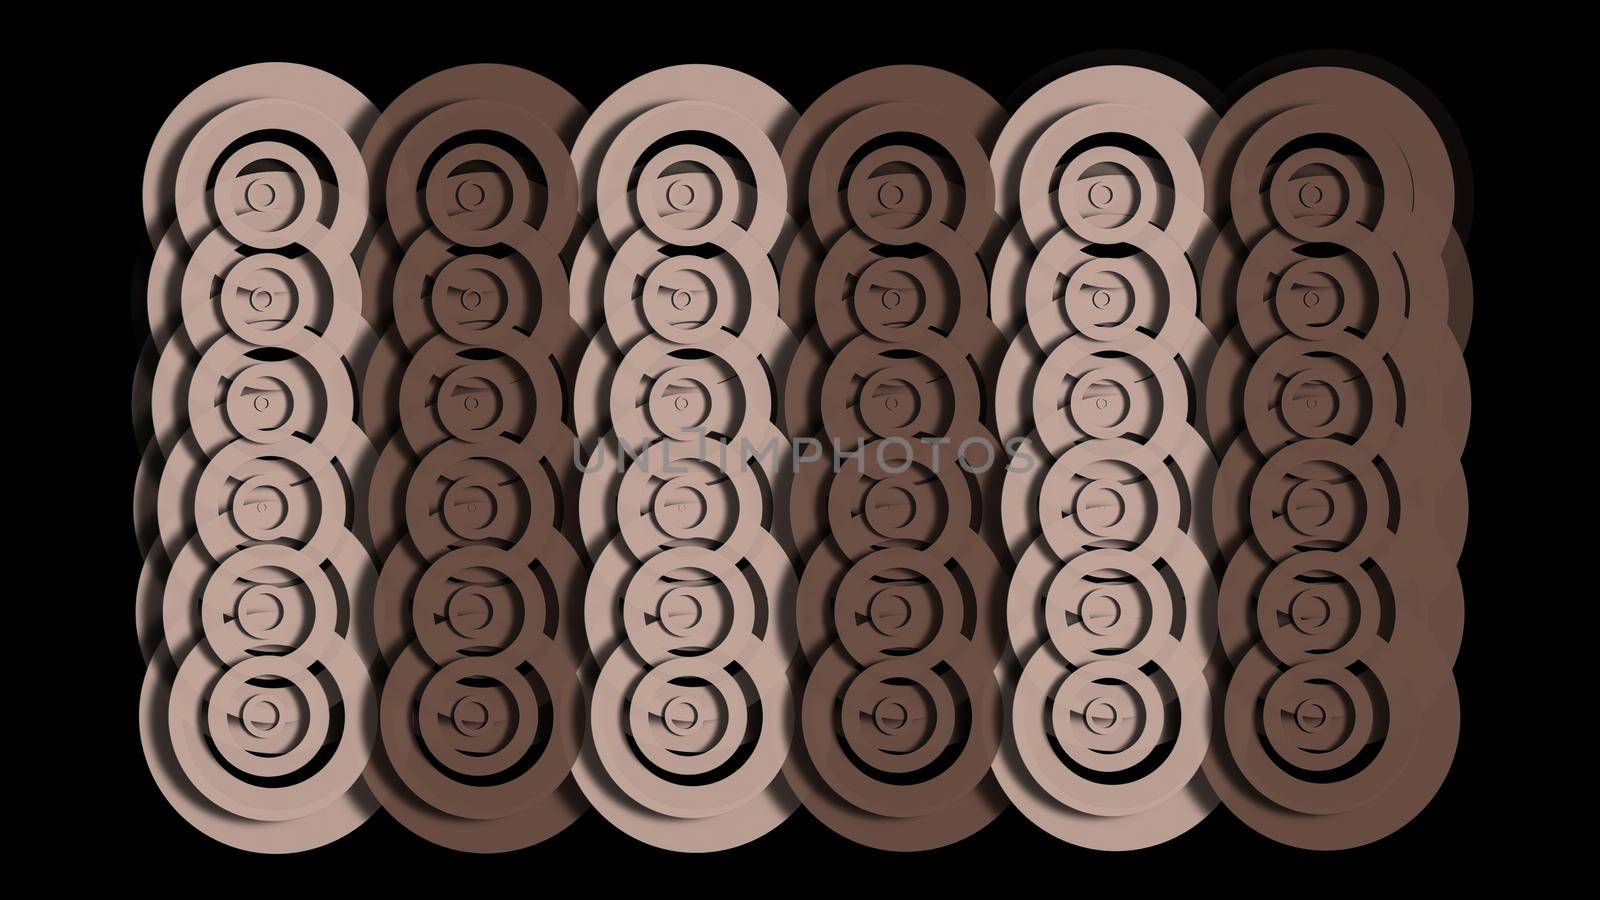 3d illustration - Abstract hypnotic  circle  background - psychedelic optical illusion